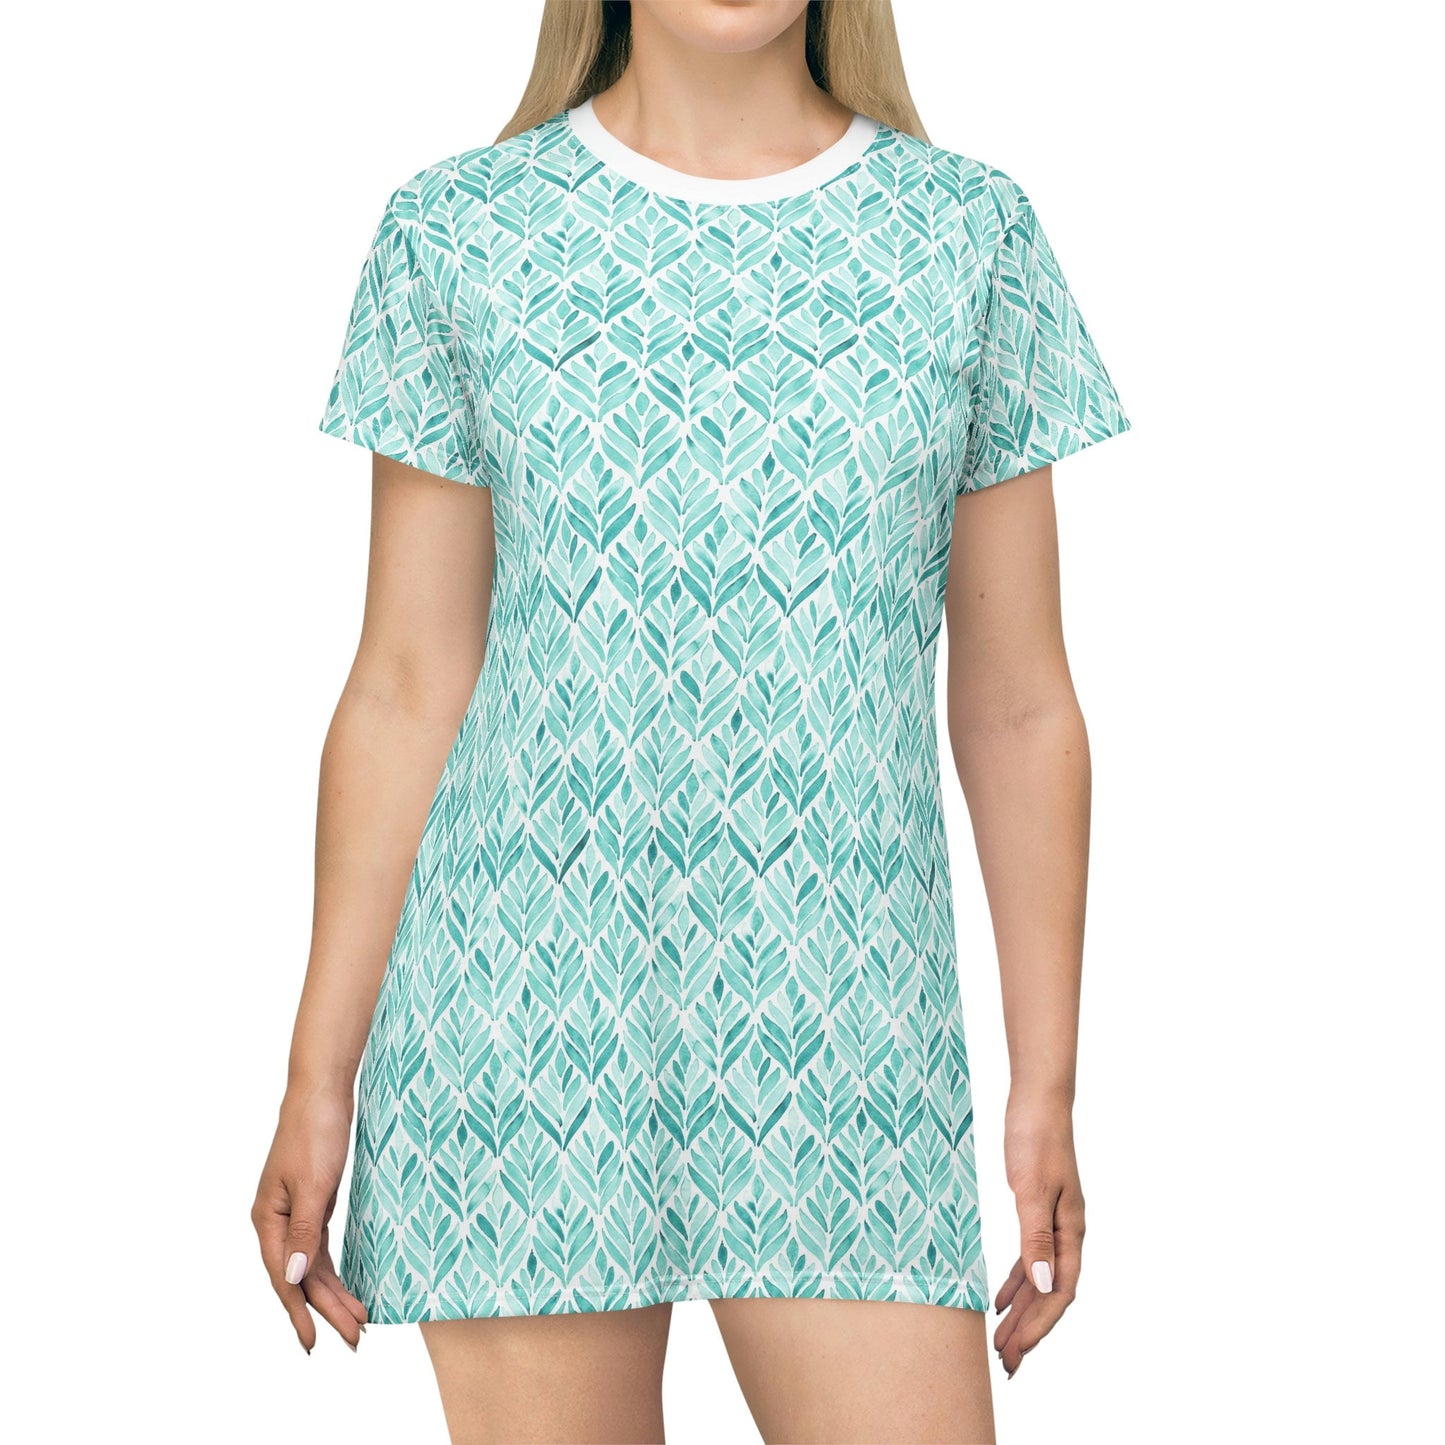 T-Shirt Dress - Turquoise Watercolor